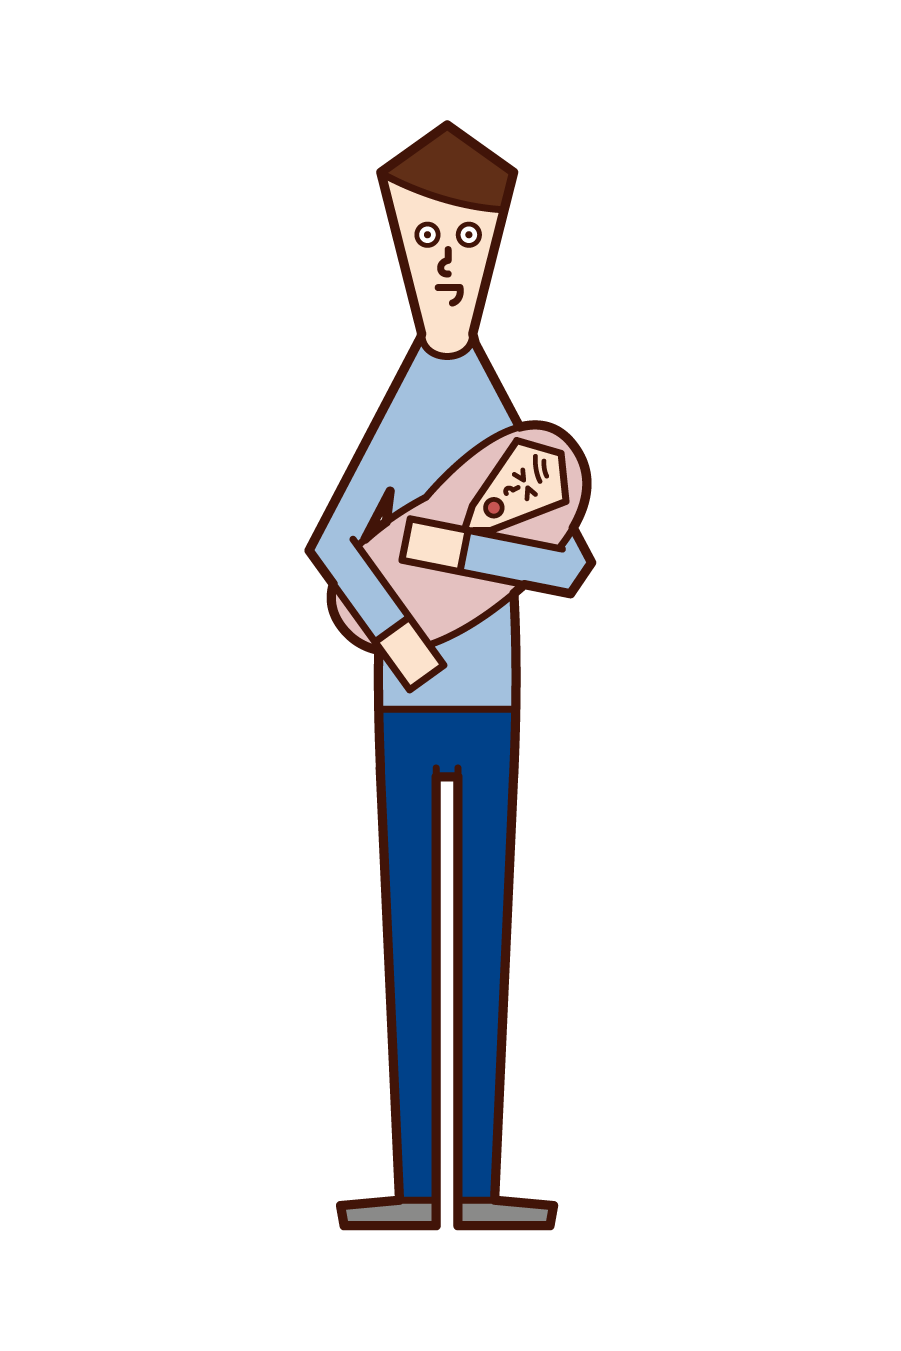 Illustration of a man holding a baby